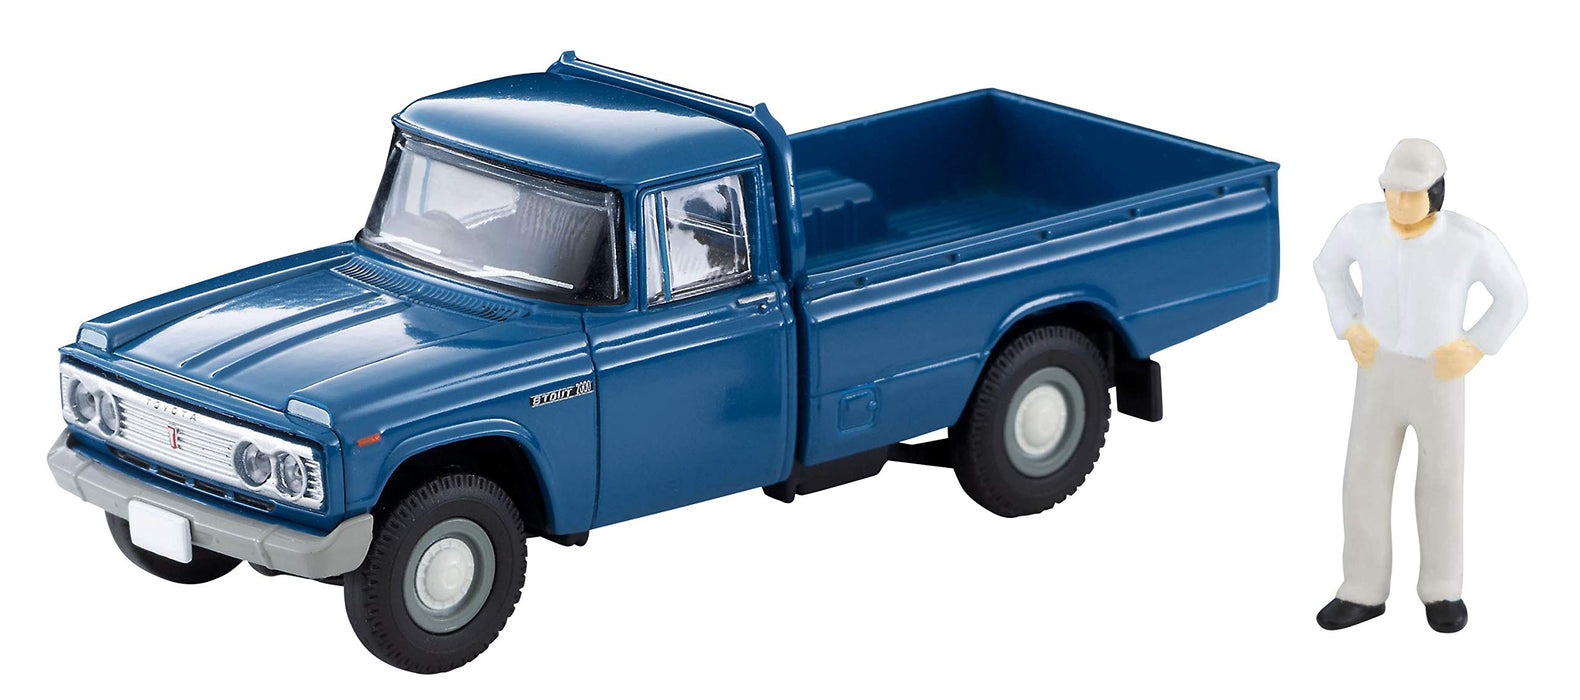 with the title

Tomytec Tomica Lv-189A Toyota Stout Blue 1/64